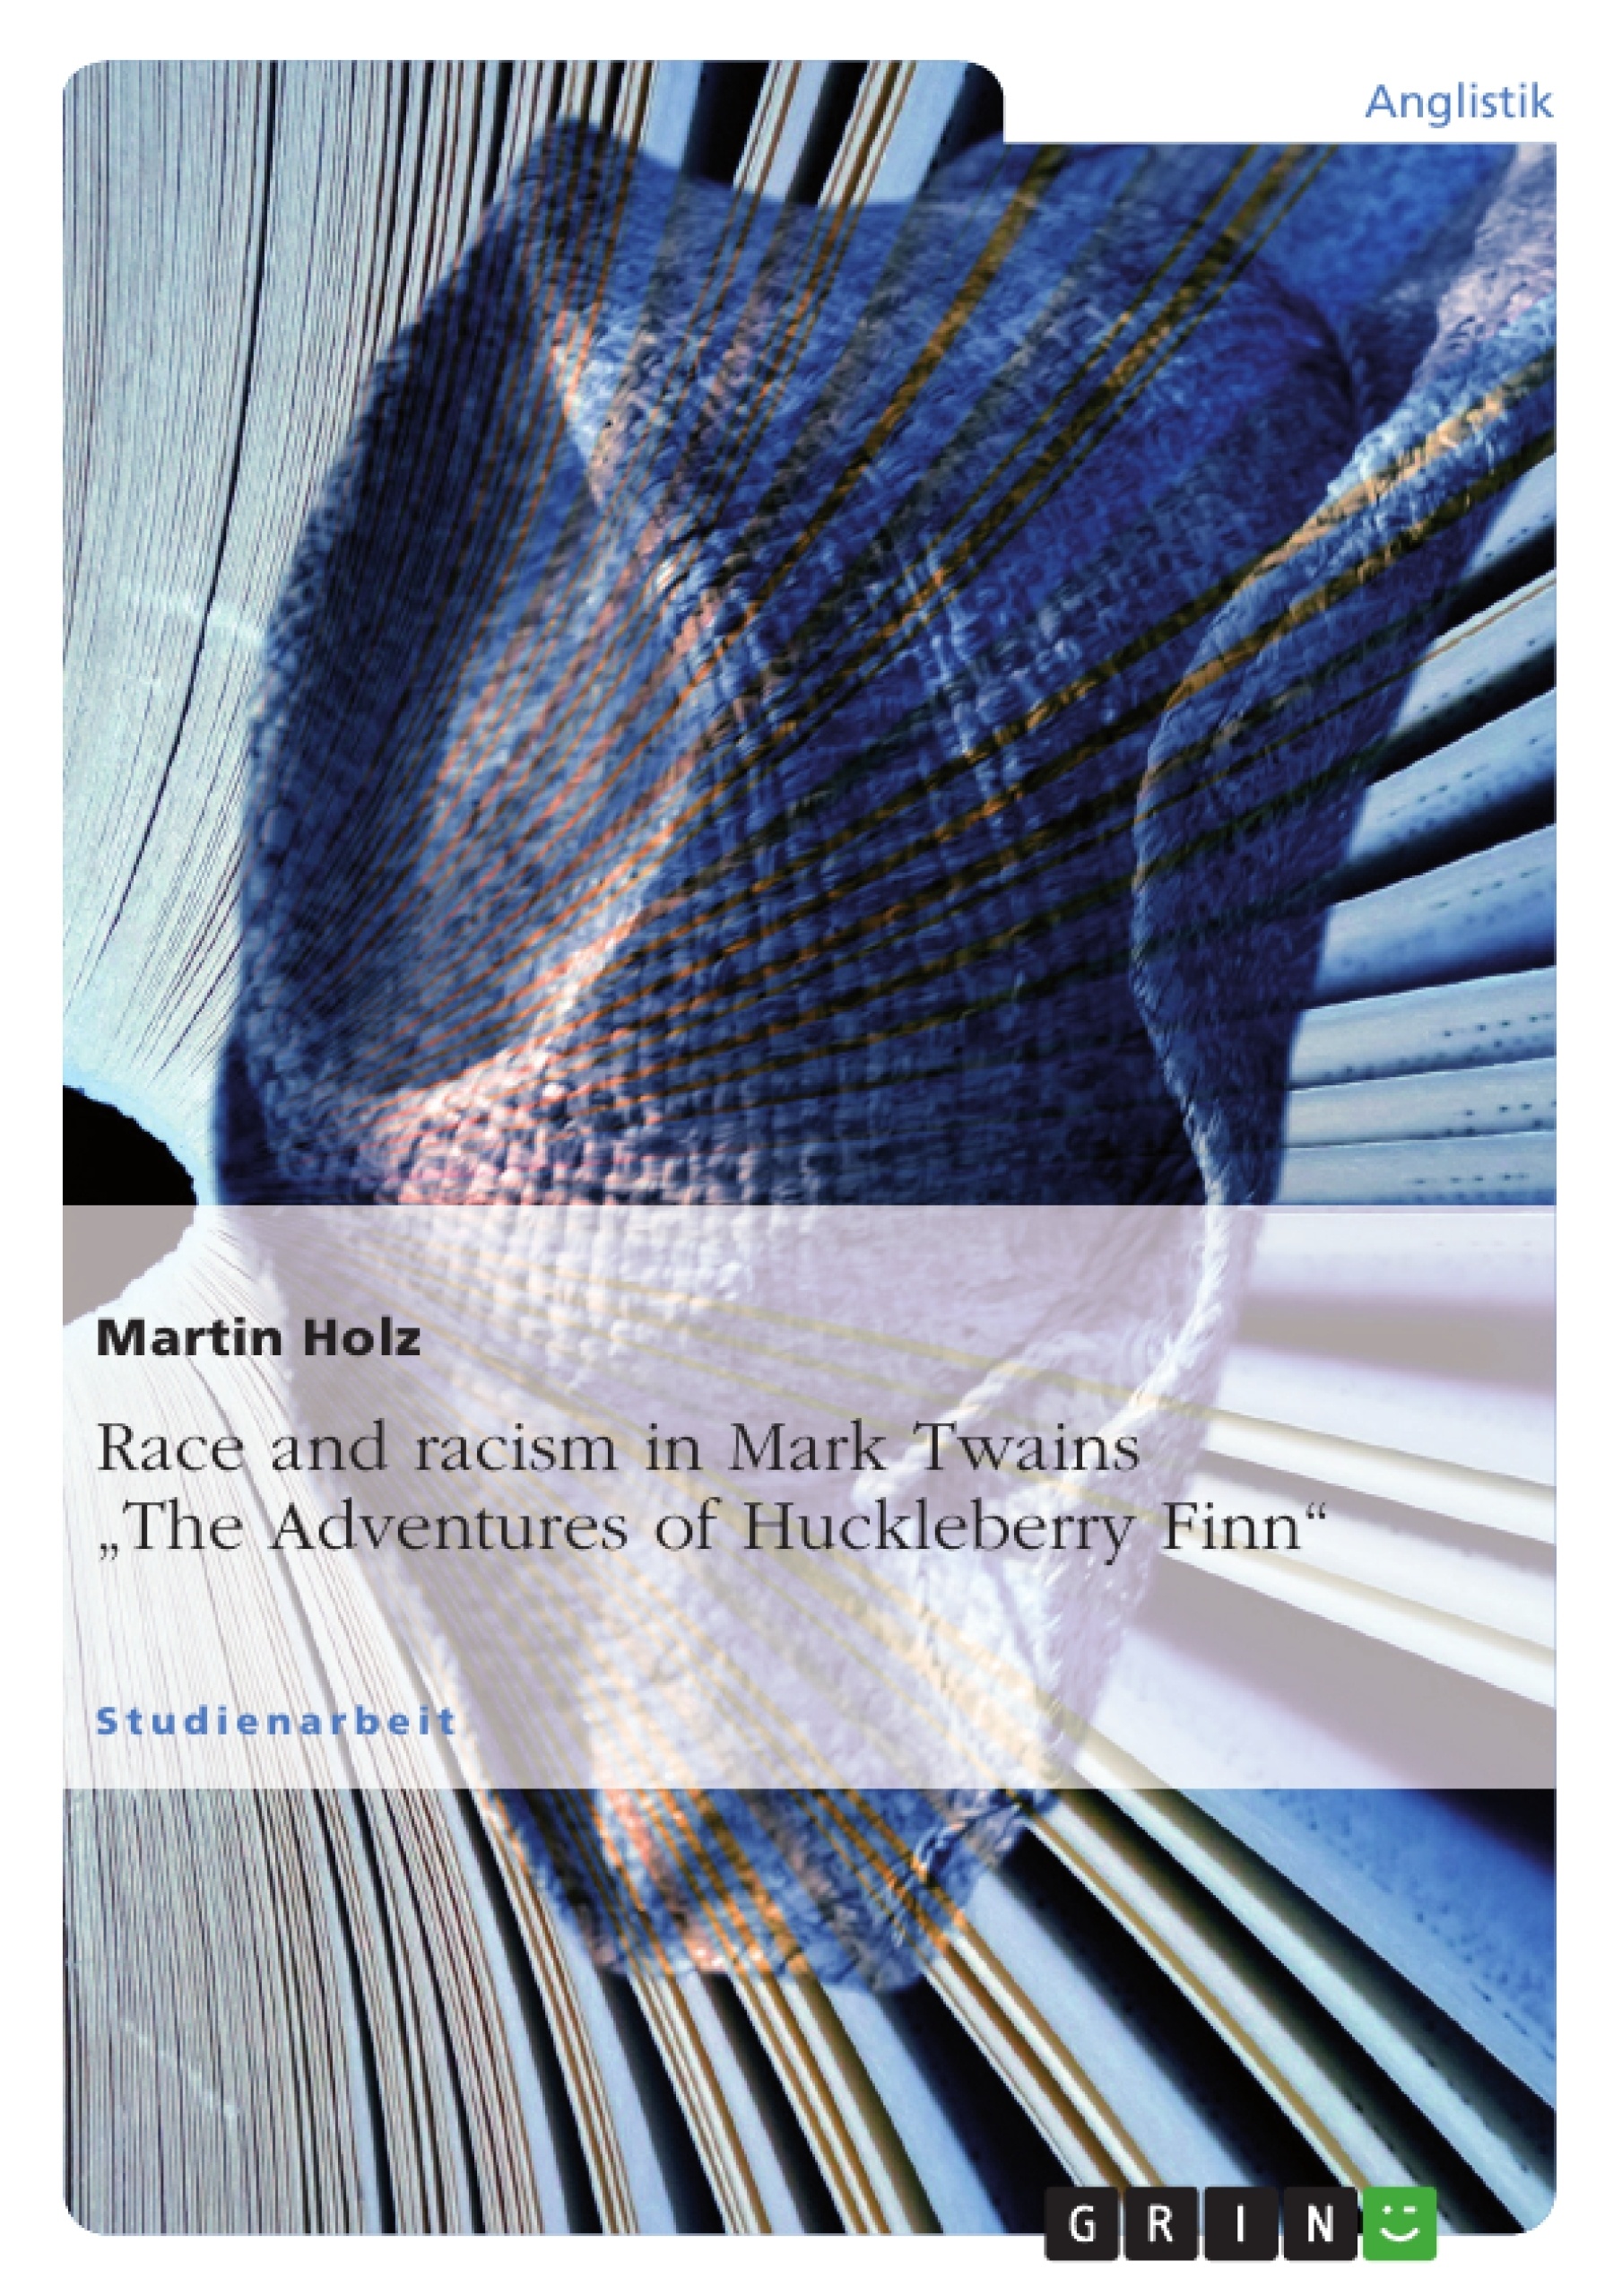 A Literary Analysis of the Racism in the Adventures of Huckleberry Finn by Mark Twain